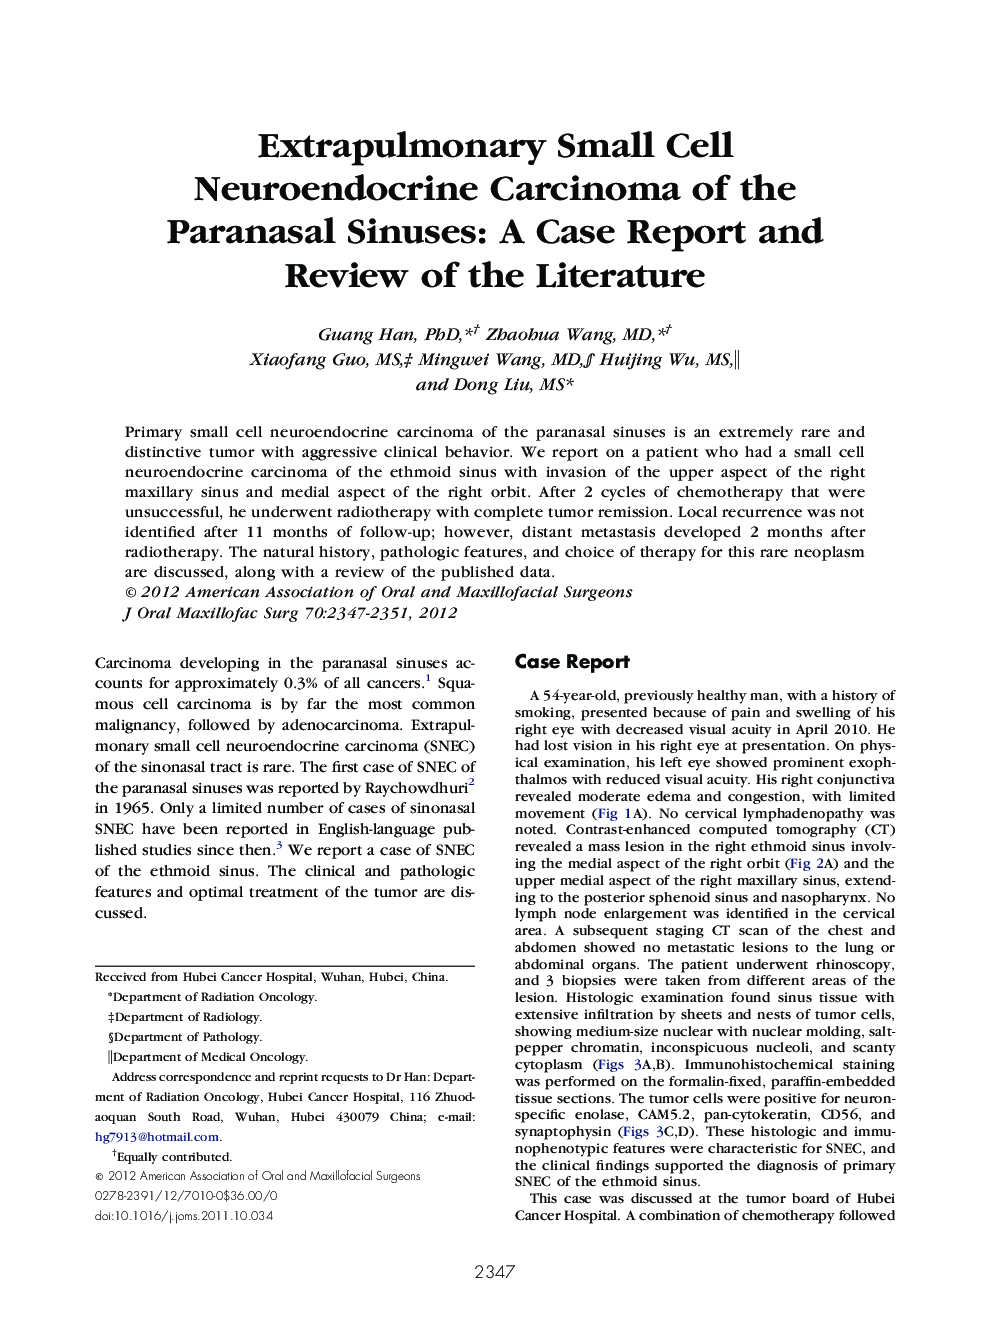 Extrapulmonary Small Cell Neuroendocrine Carcinoma of the Paranasal Sinuses: A Case Report and Review of the Literature